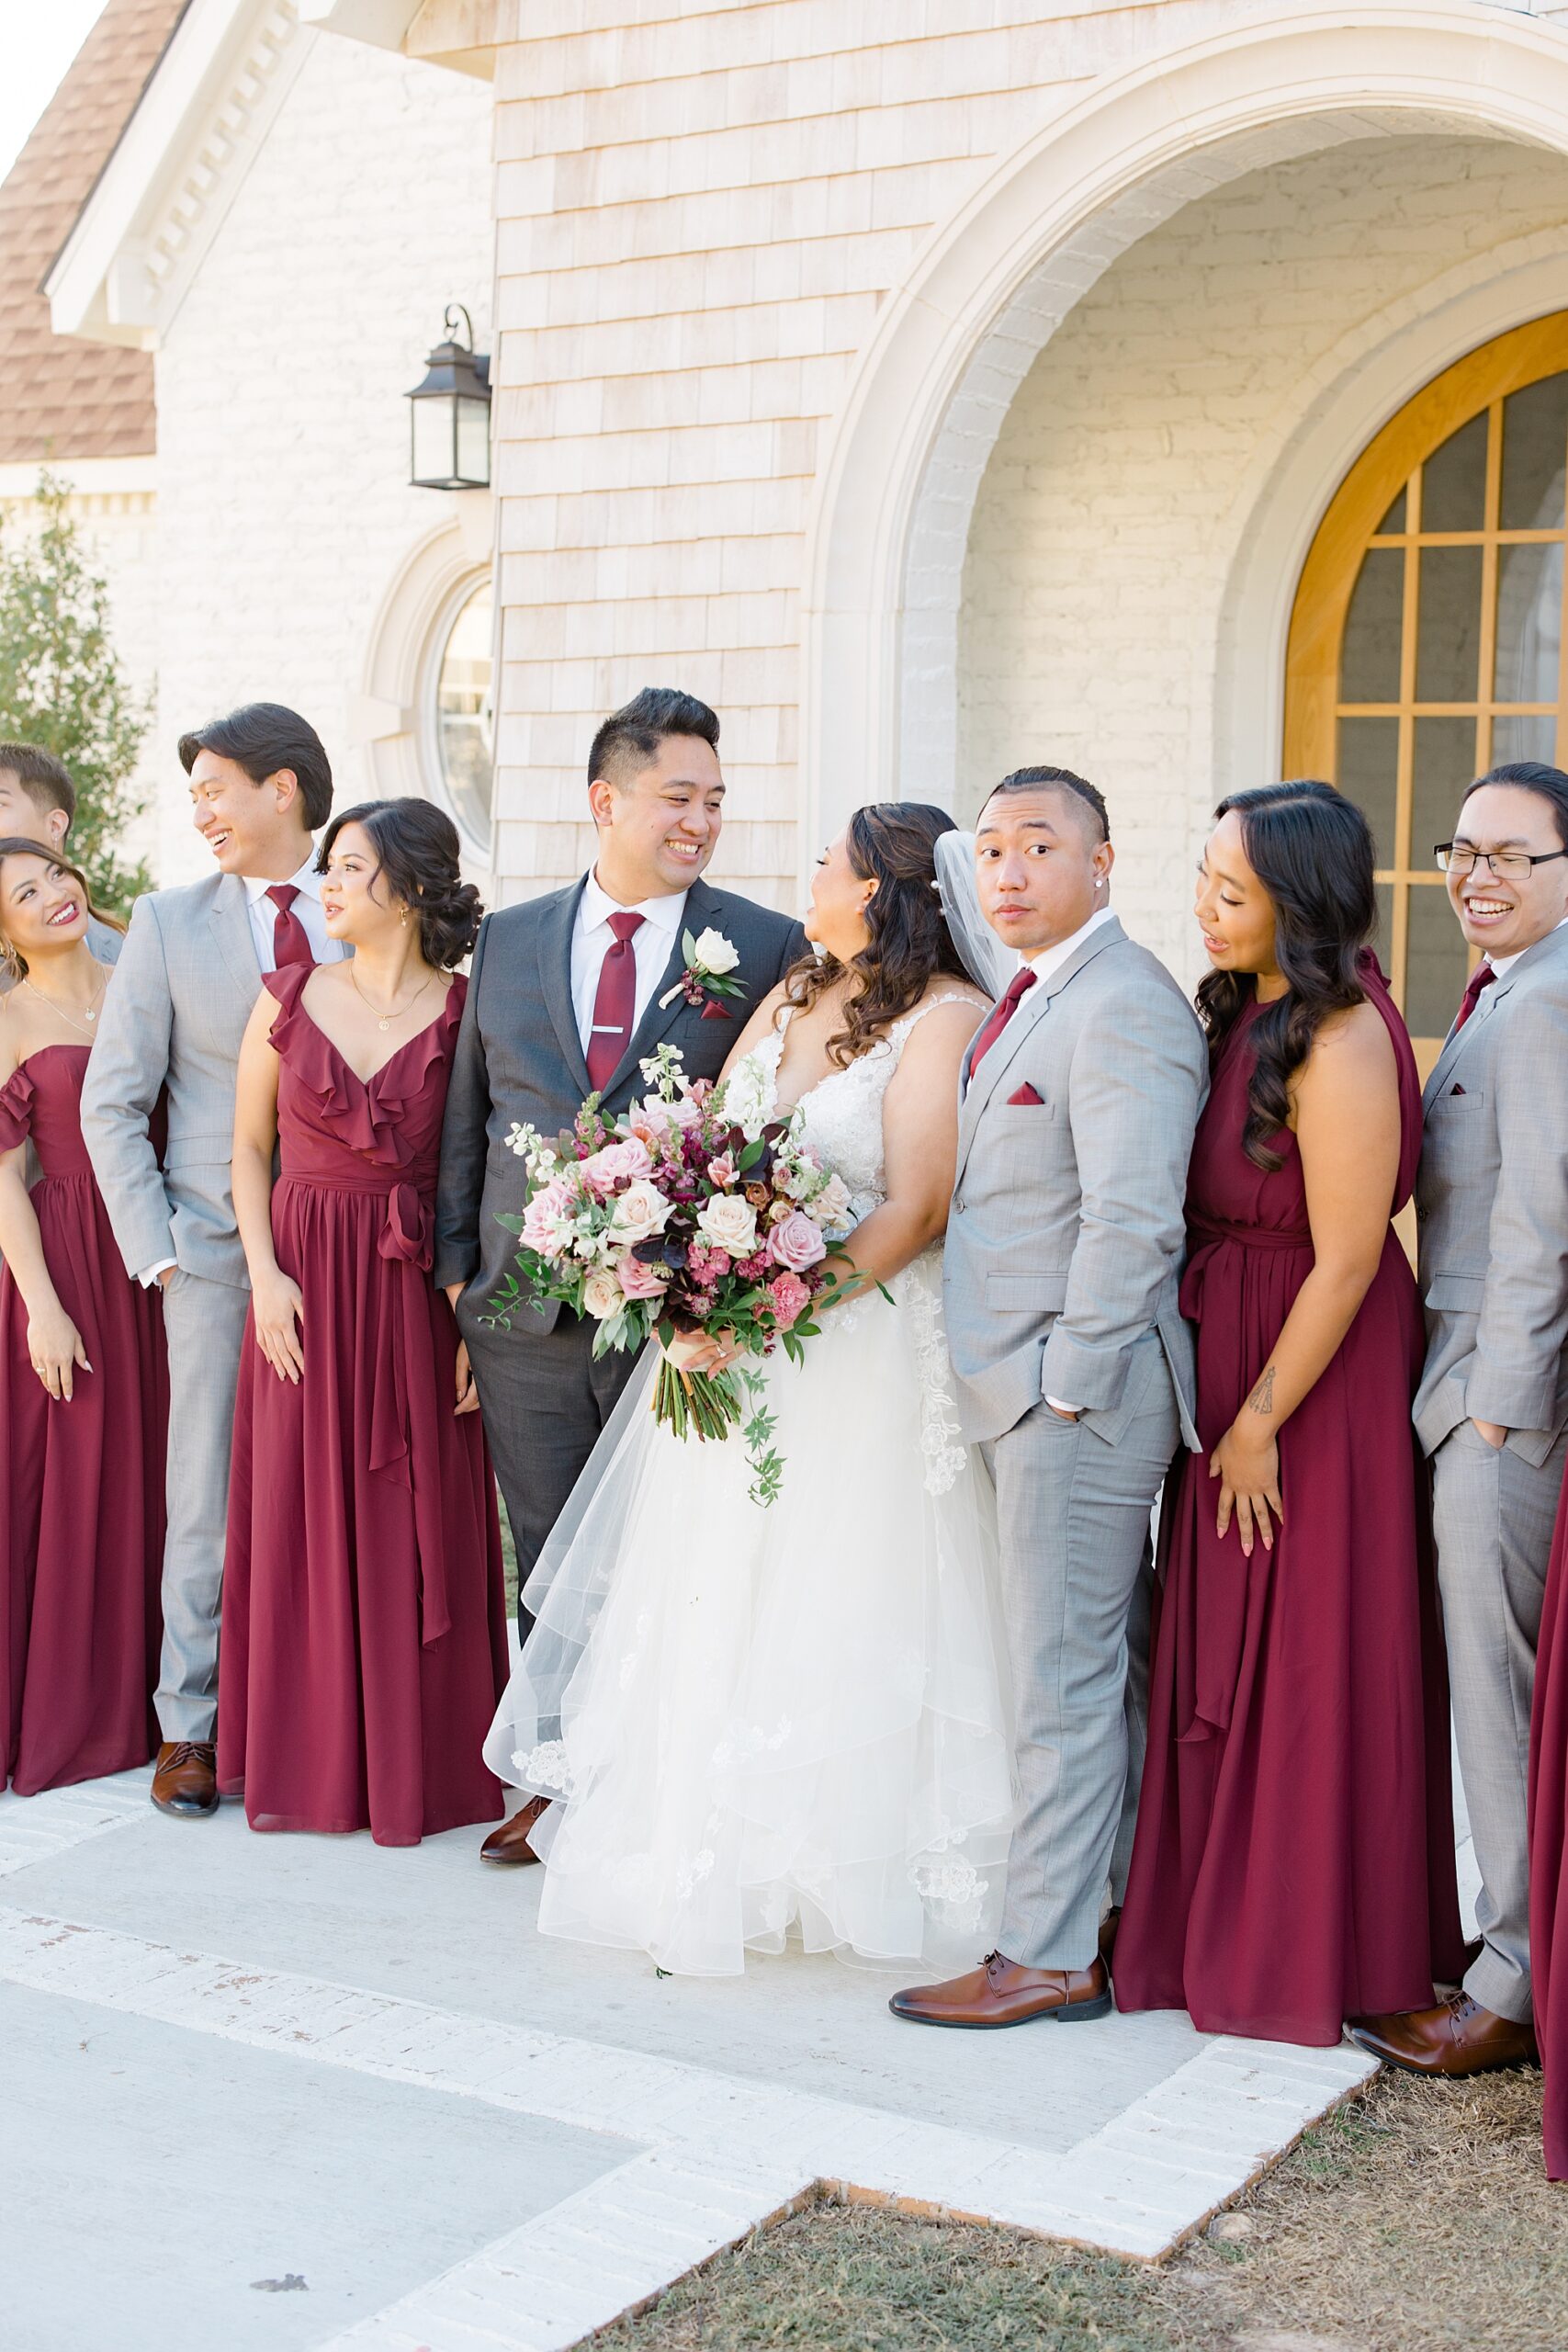 newlyweds pose with wedding party in burgundy and grey attire 